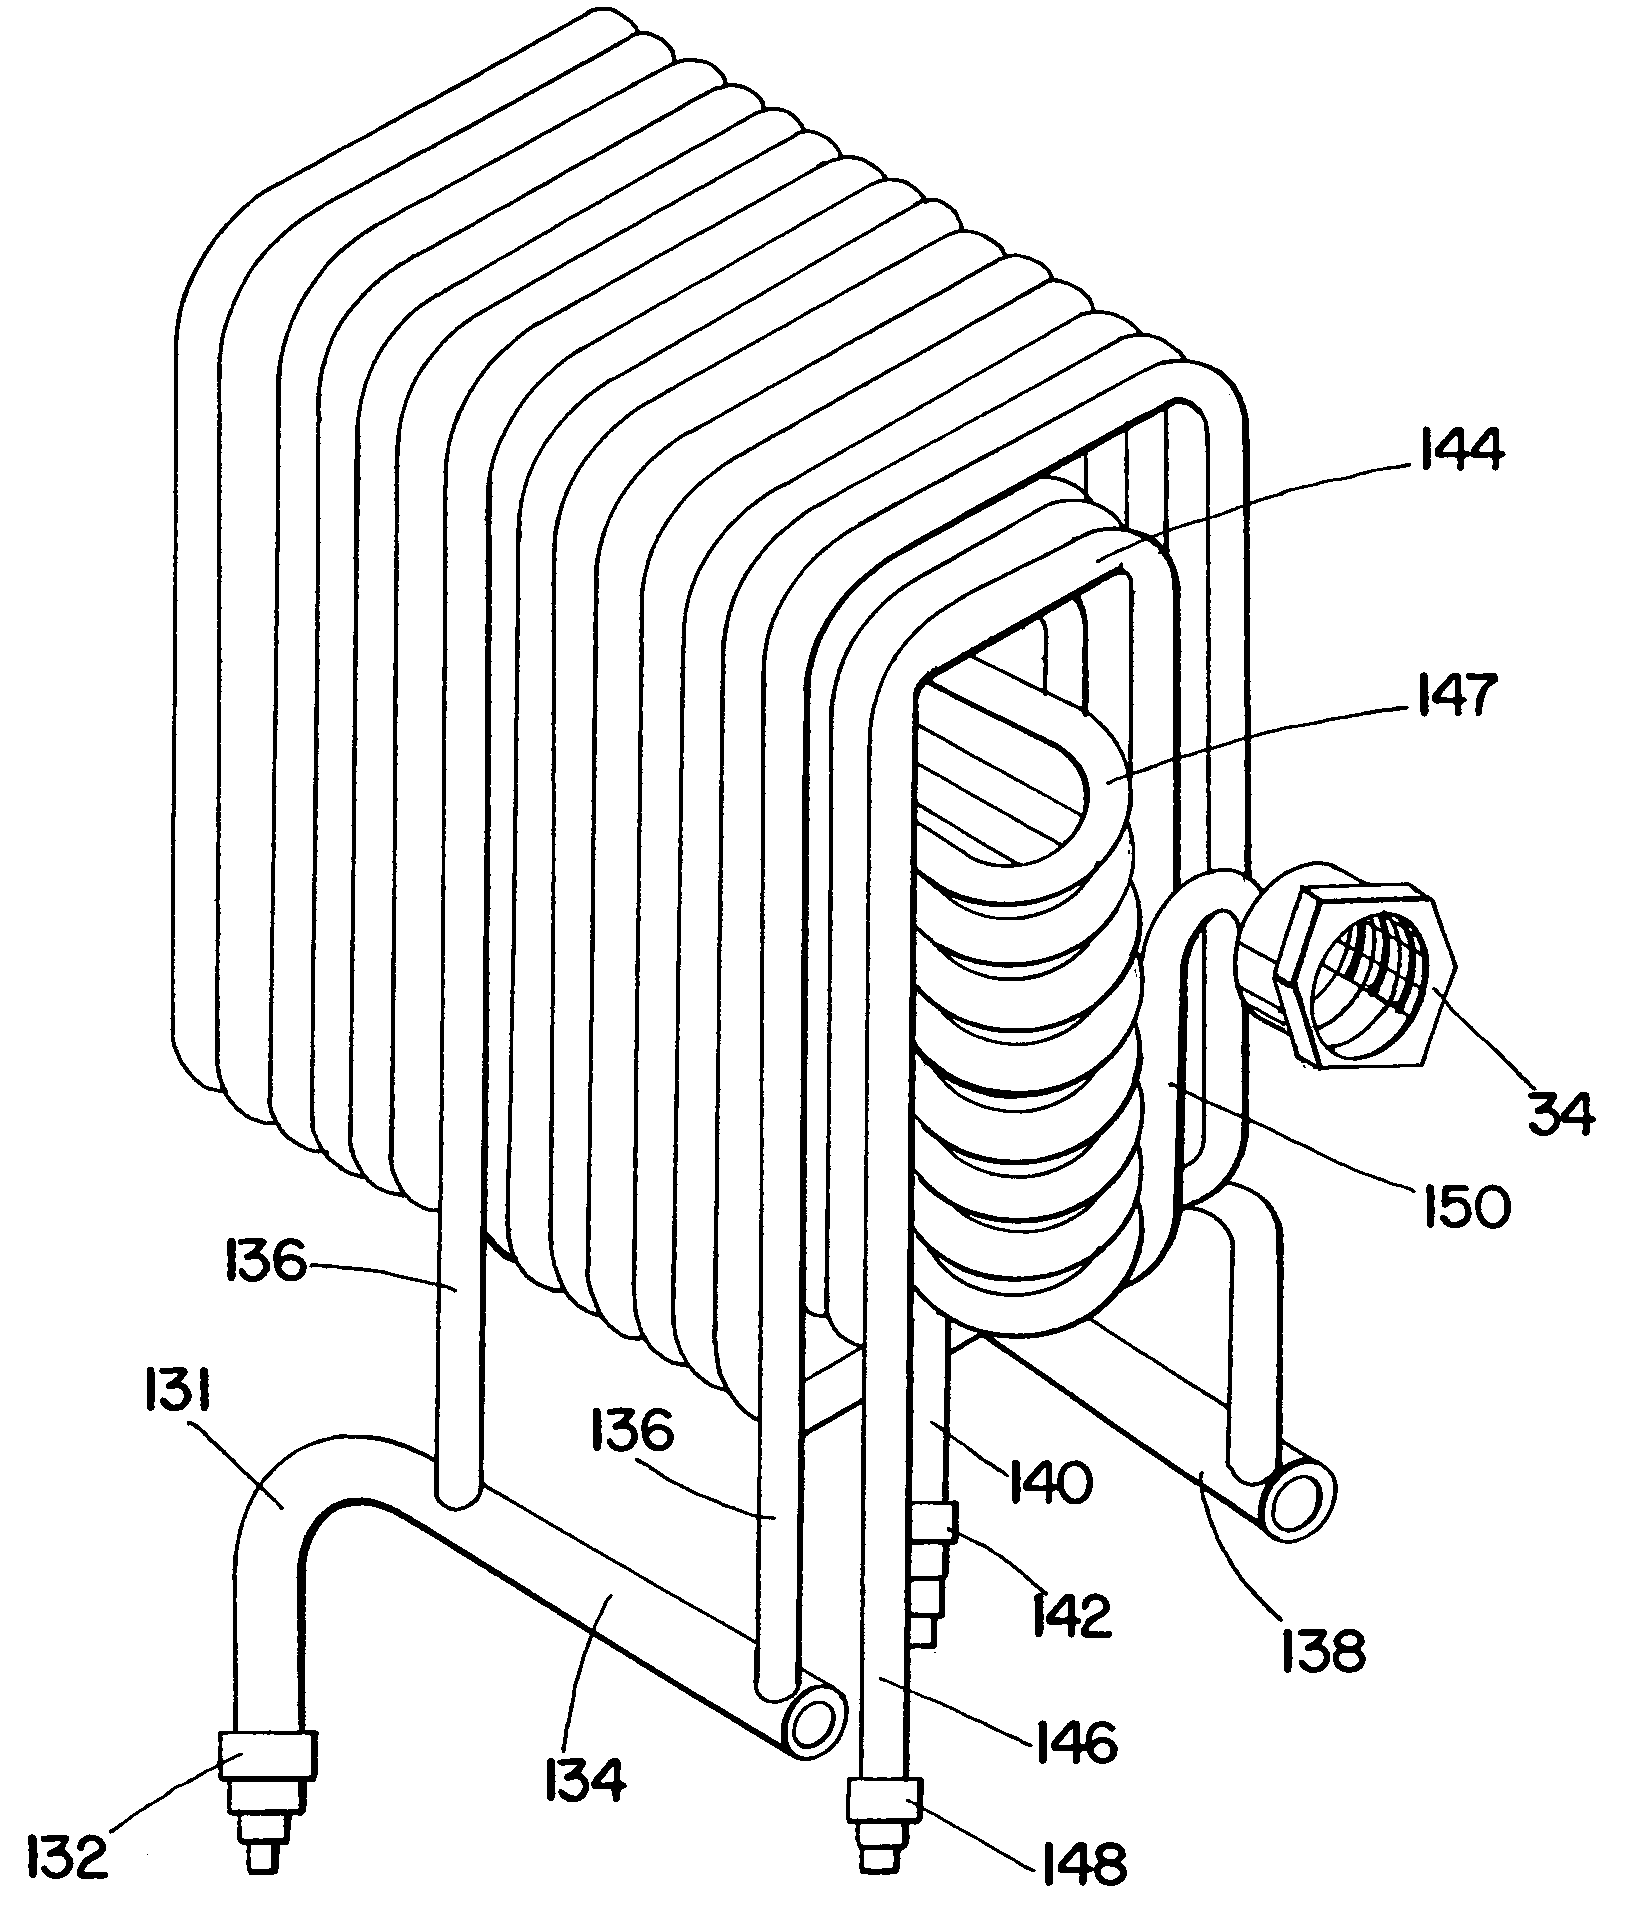 Apparatus for cooling fluids